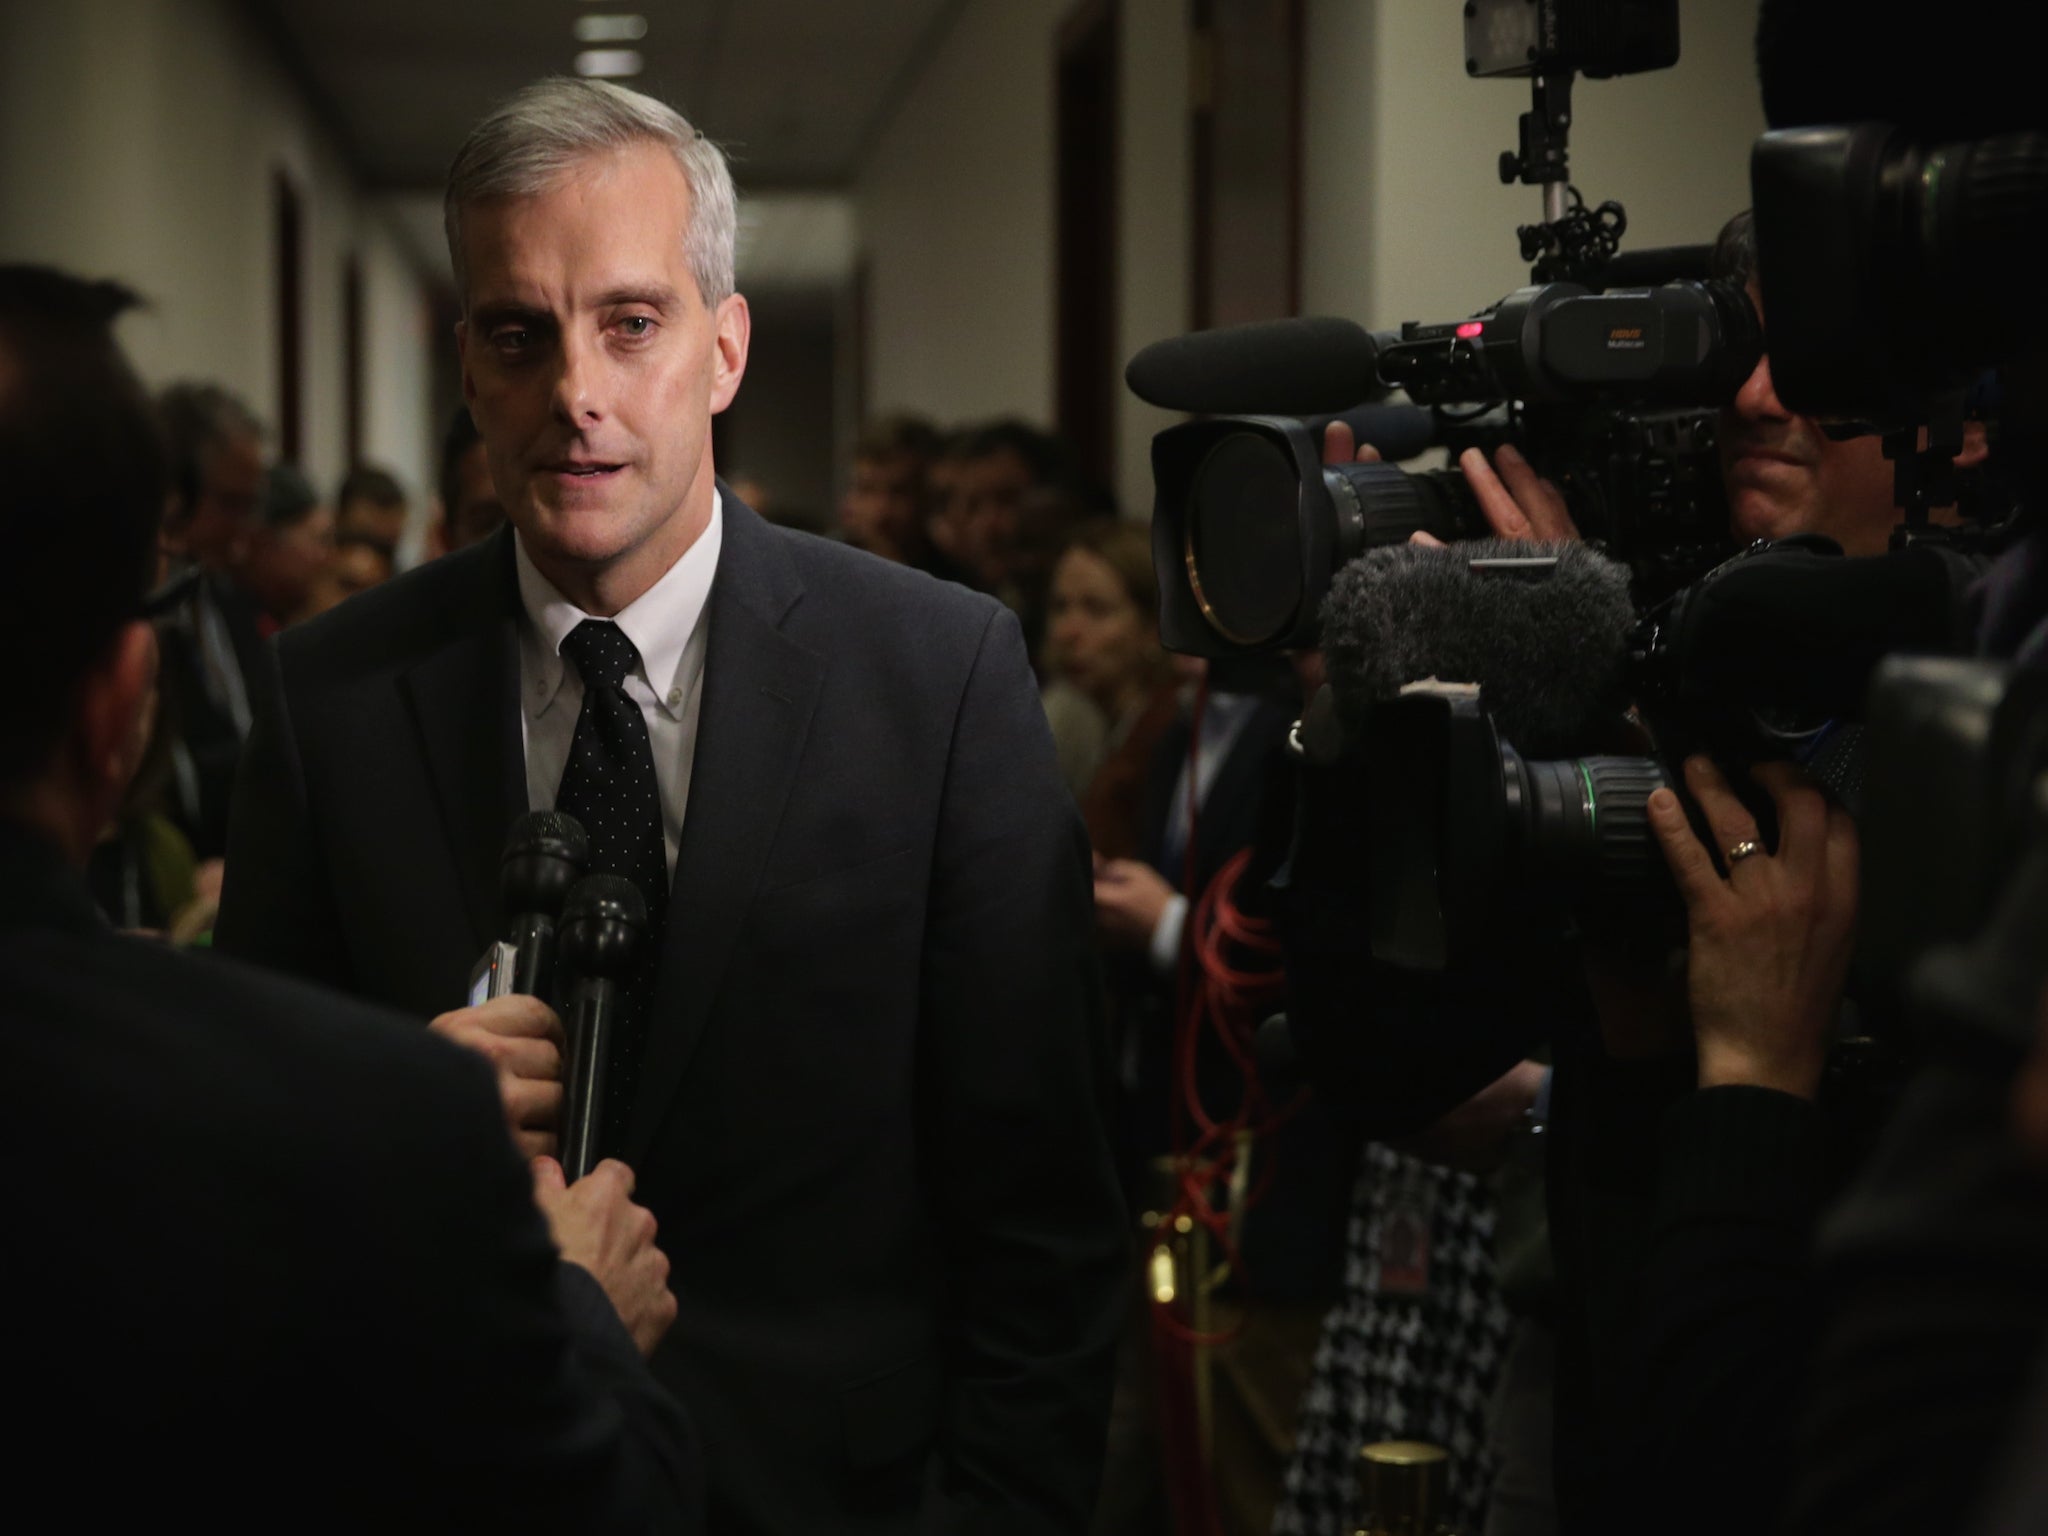 Mr Obama's chief of staff Denis McDonough named an American woman being held hostage by ISIS